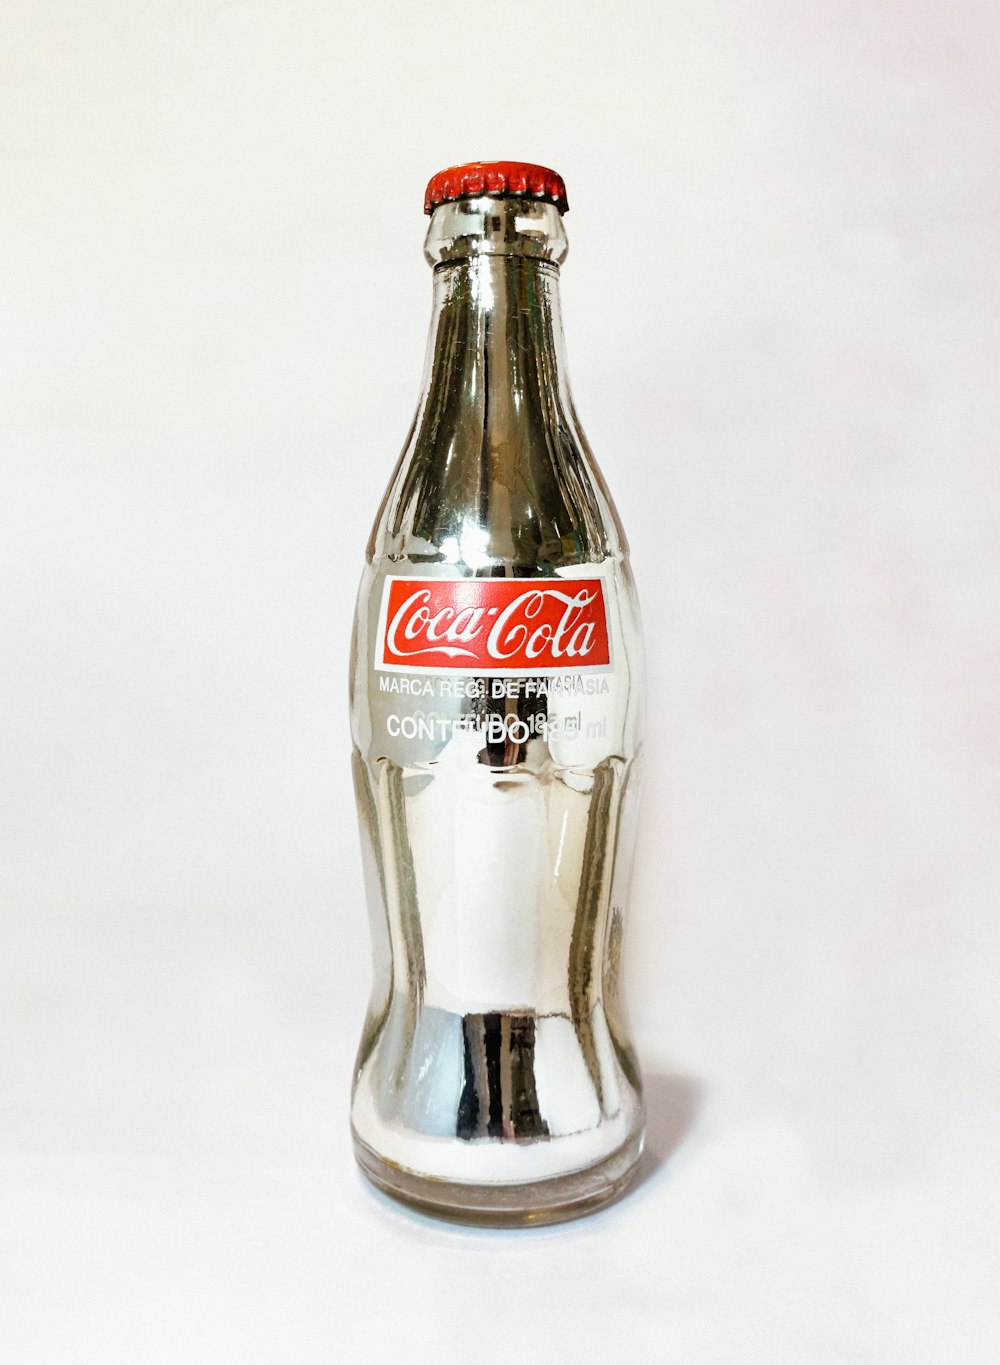 coca cola glass bottle on white table